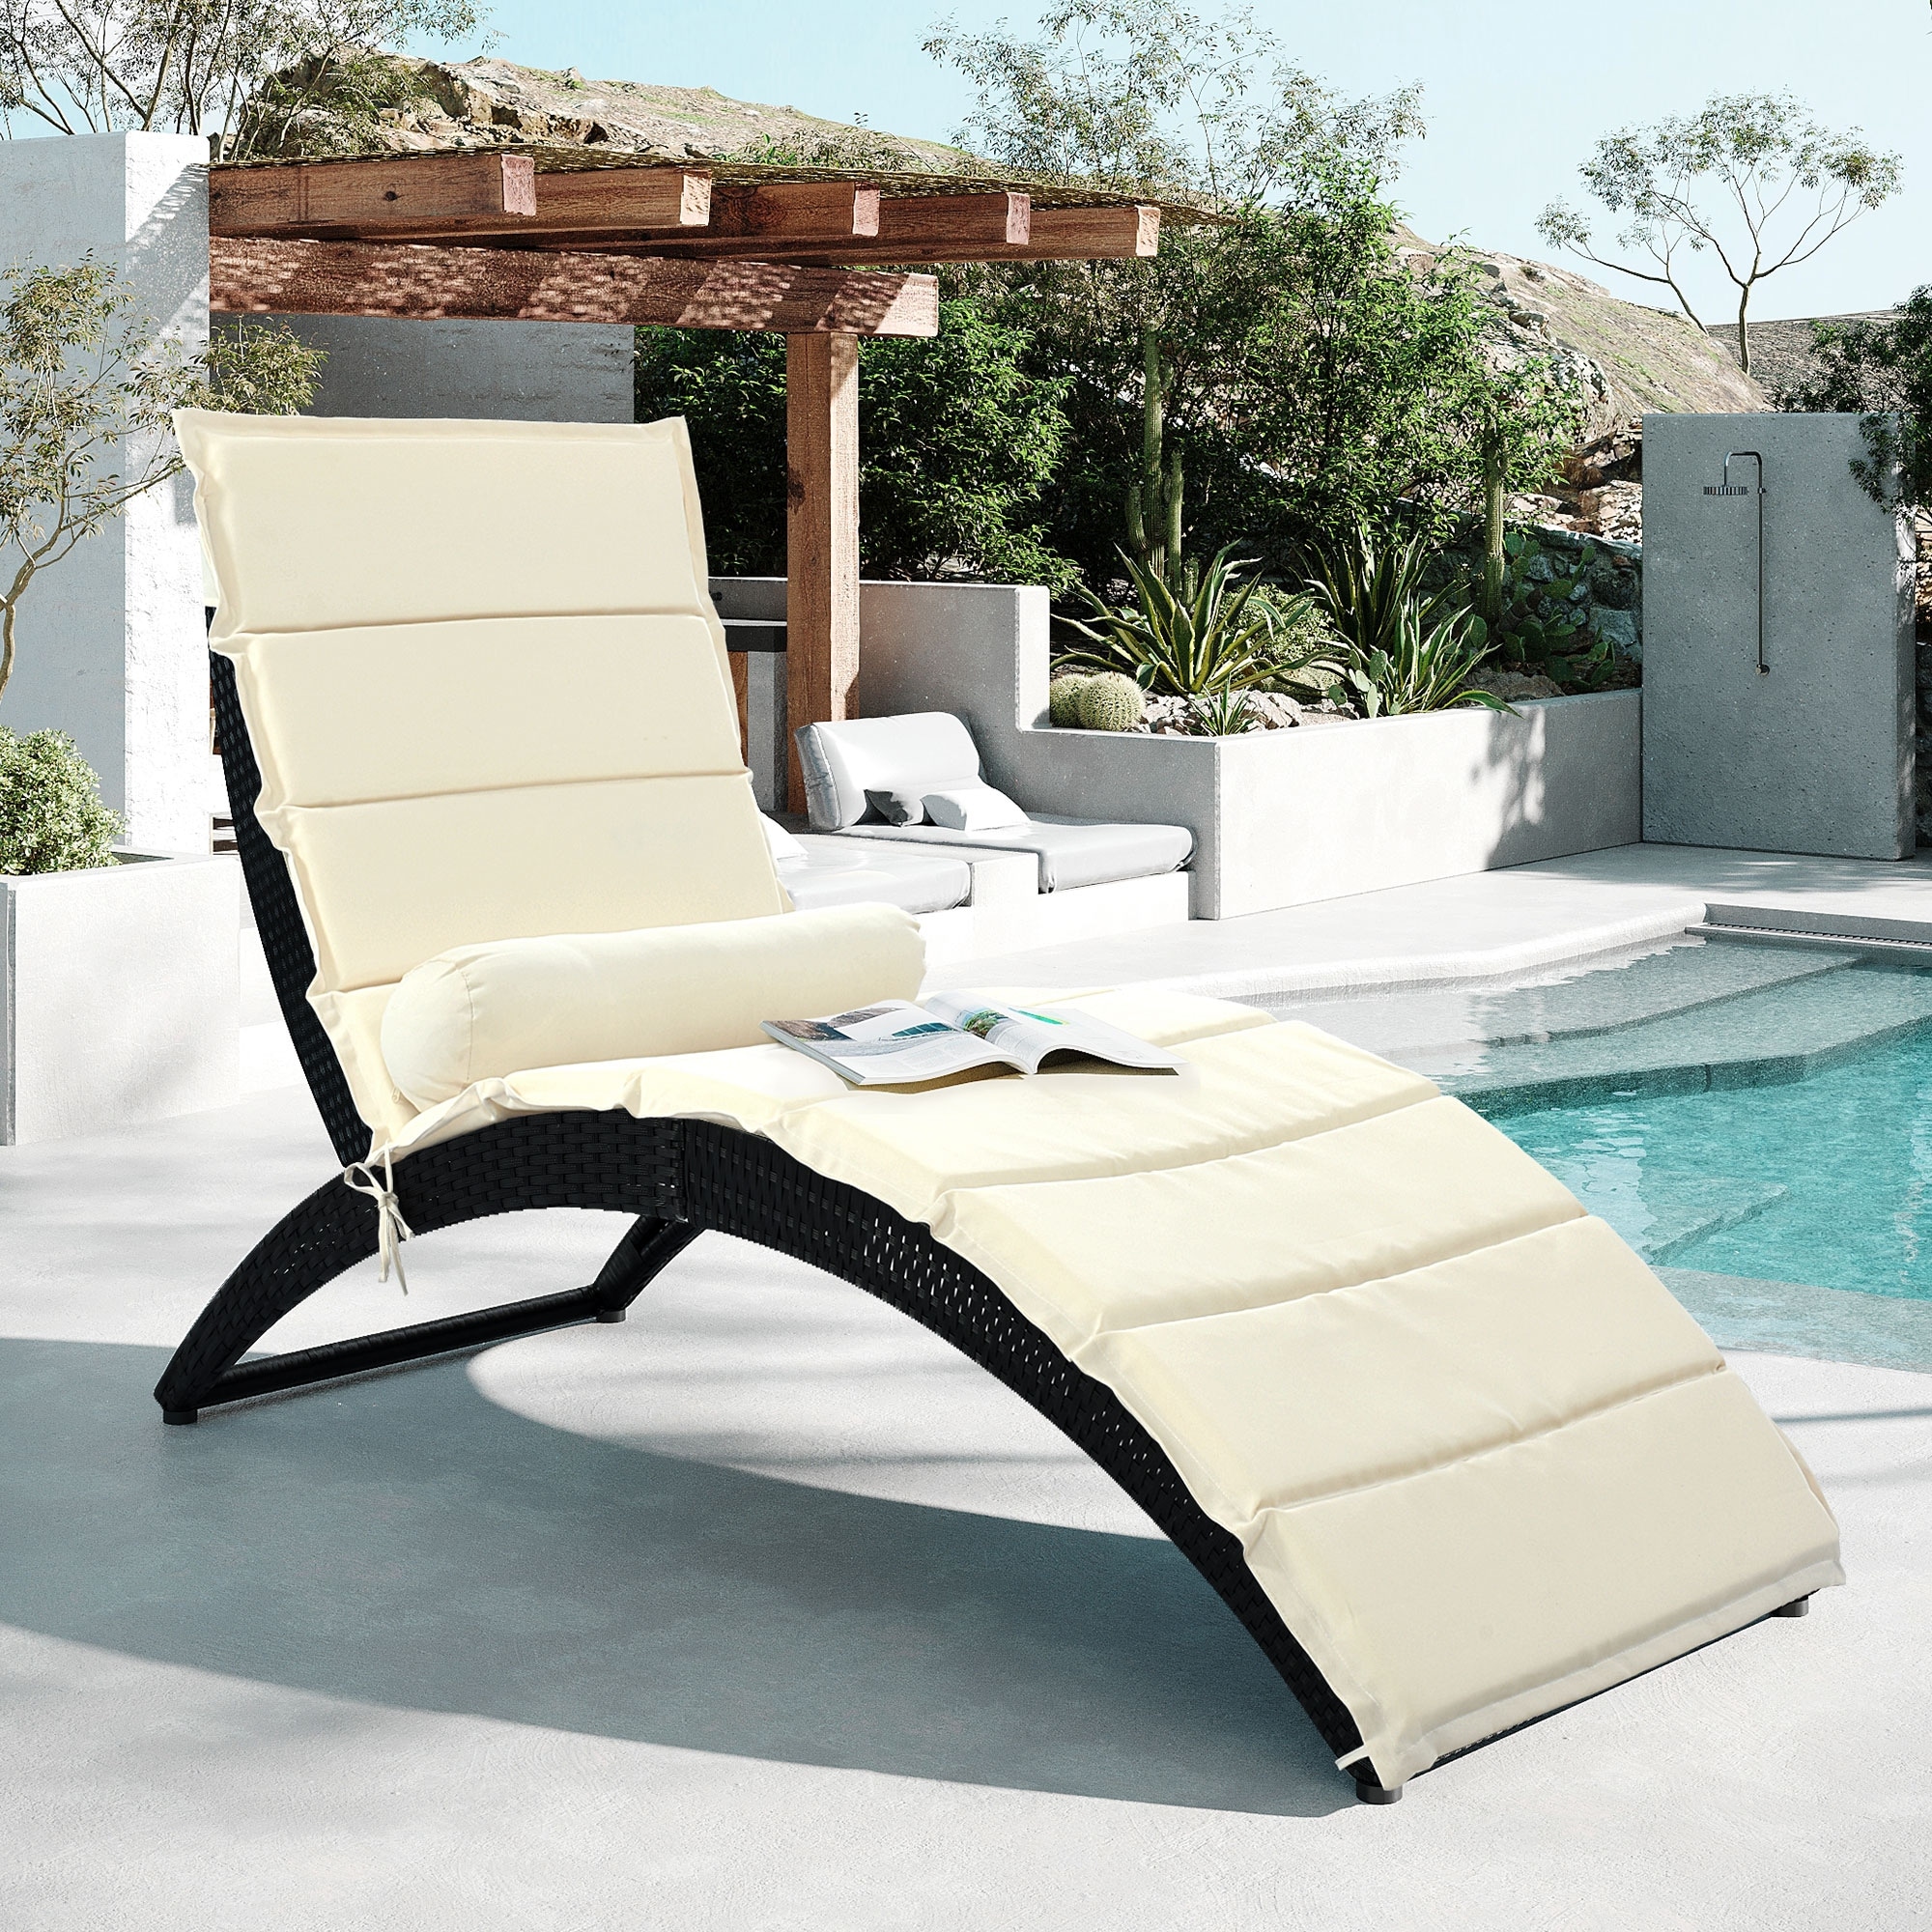 Patio Wicker Sun Lounger  Pe Rattan Foldable Chaise Lounger With Removable Cushion And Comfortable Bolster Pillow (1 Sets)